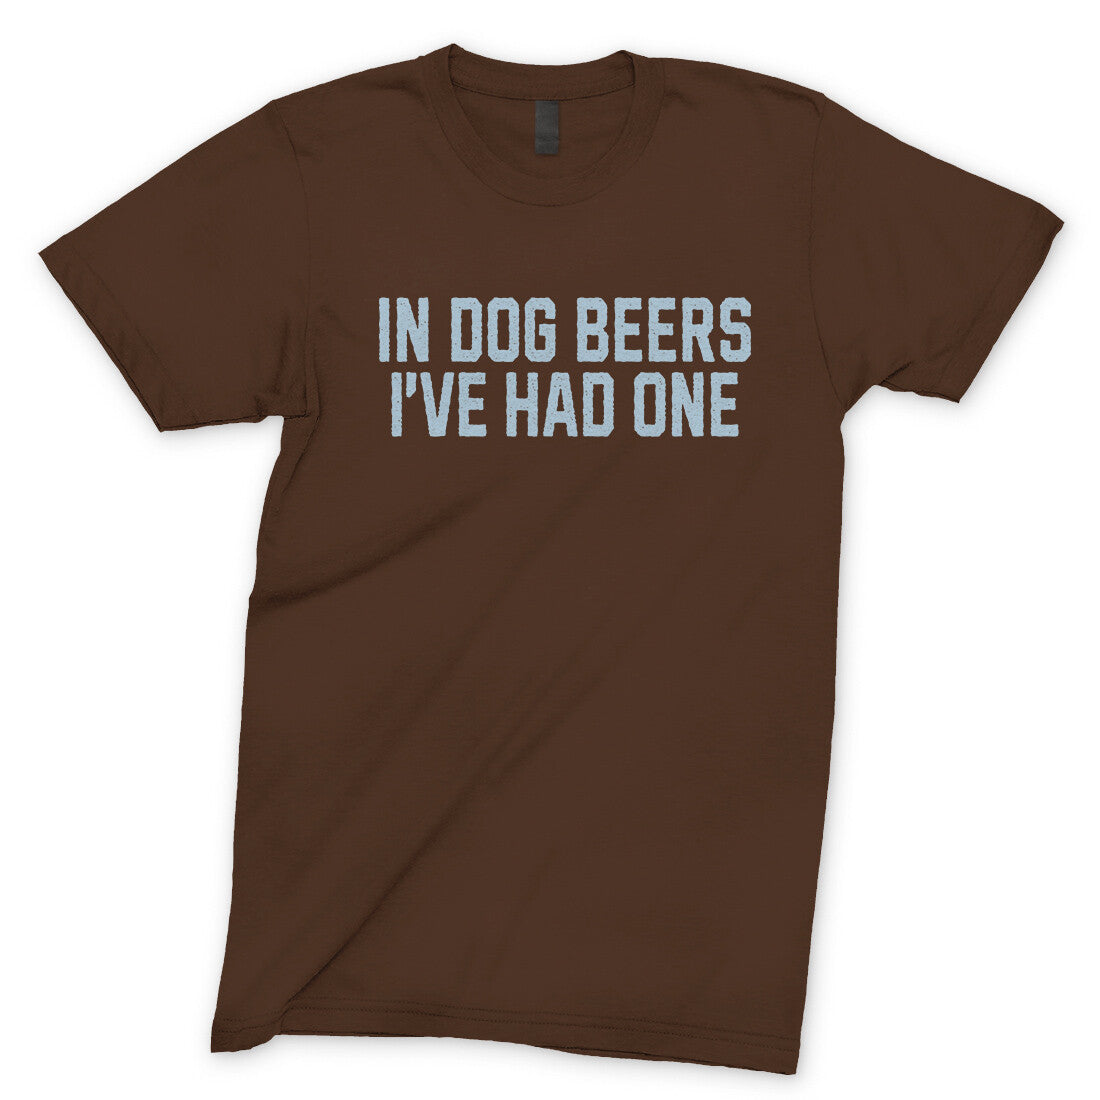 In Dog Beers I've Had One in Dark Chocolate Color